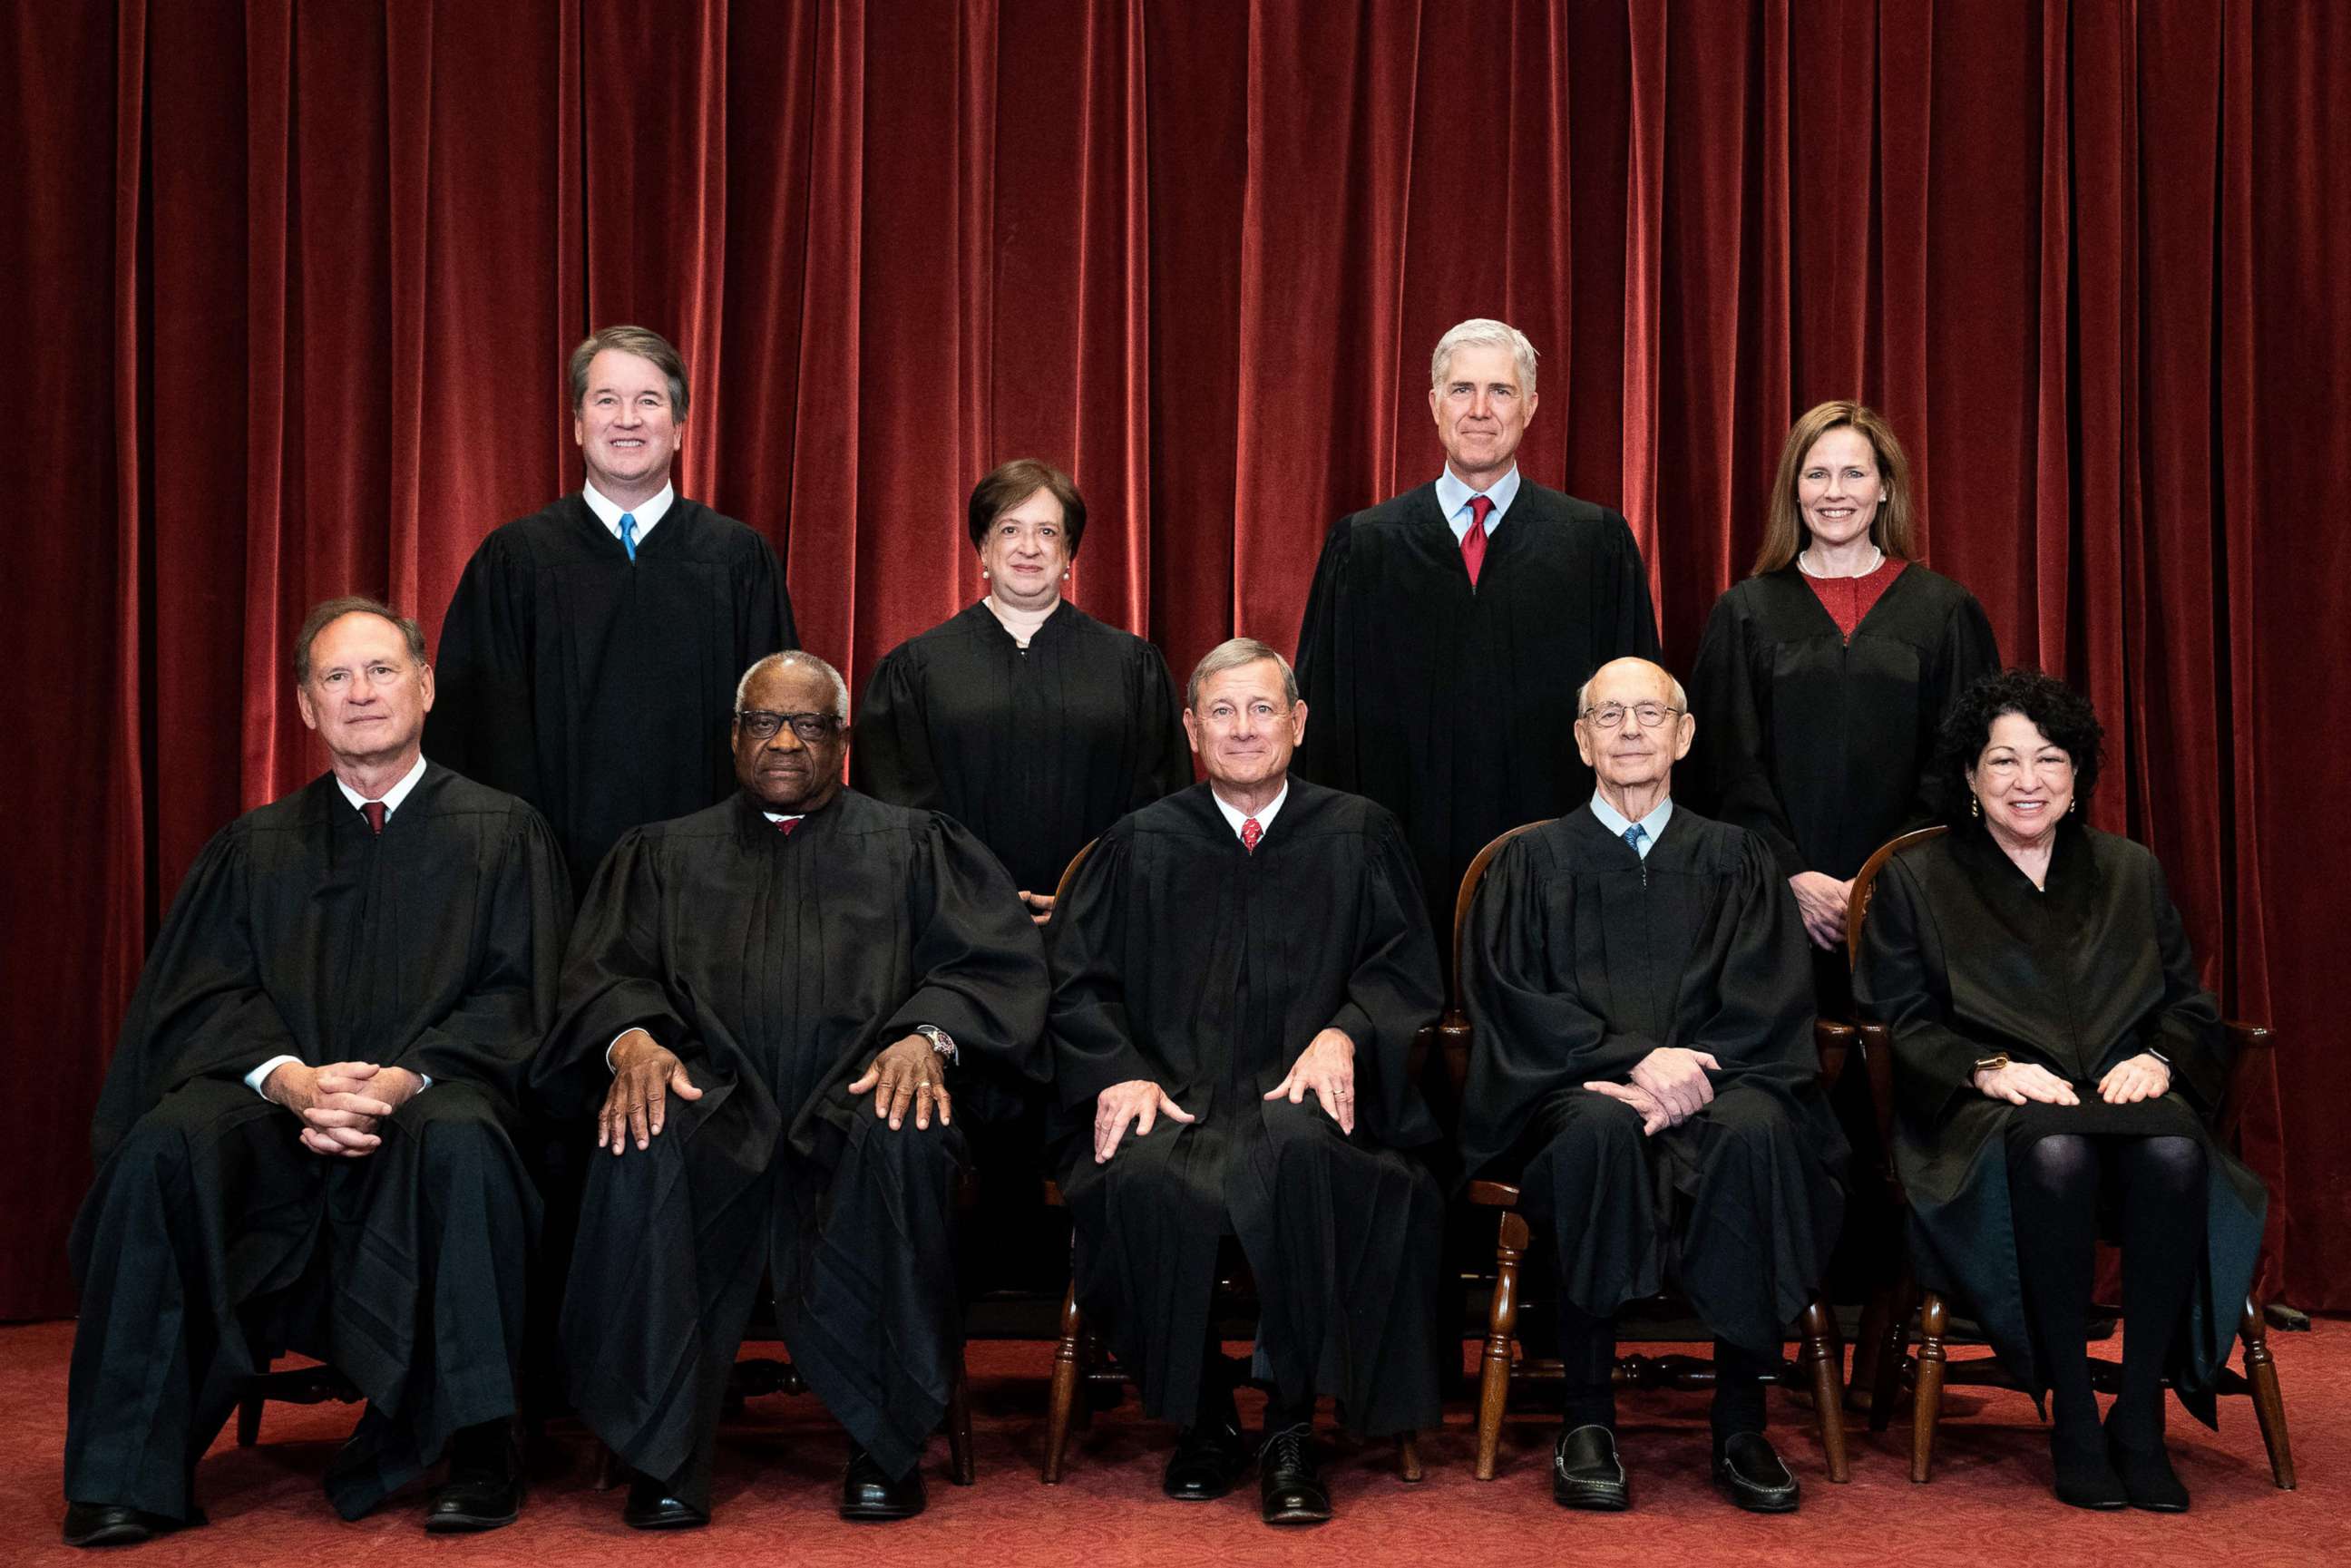 PHOTO: A group photo of the Justices at the Supreme Court in Washington on April 23, 2021.